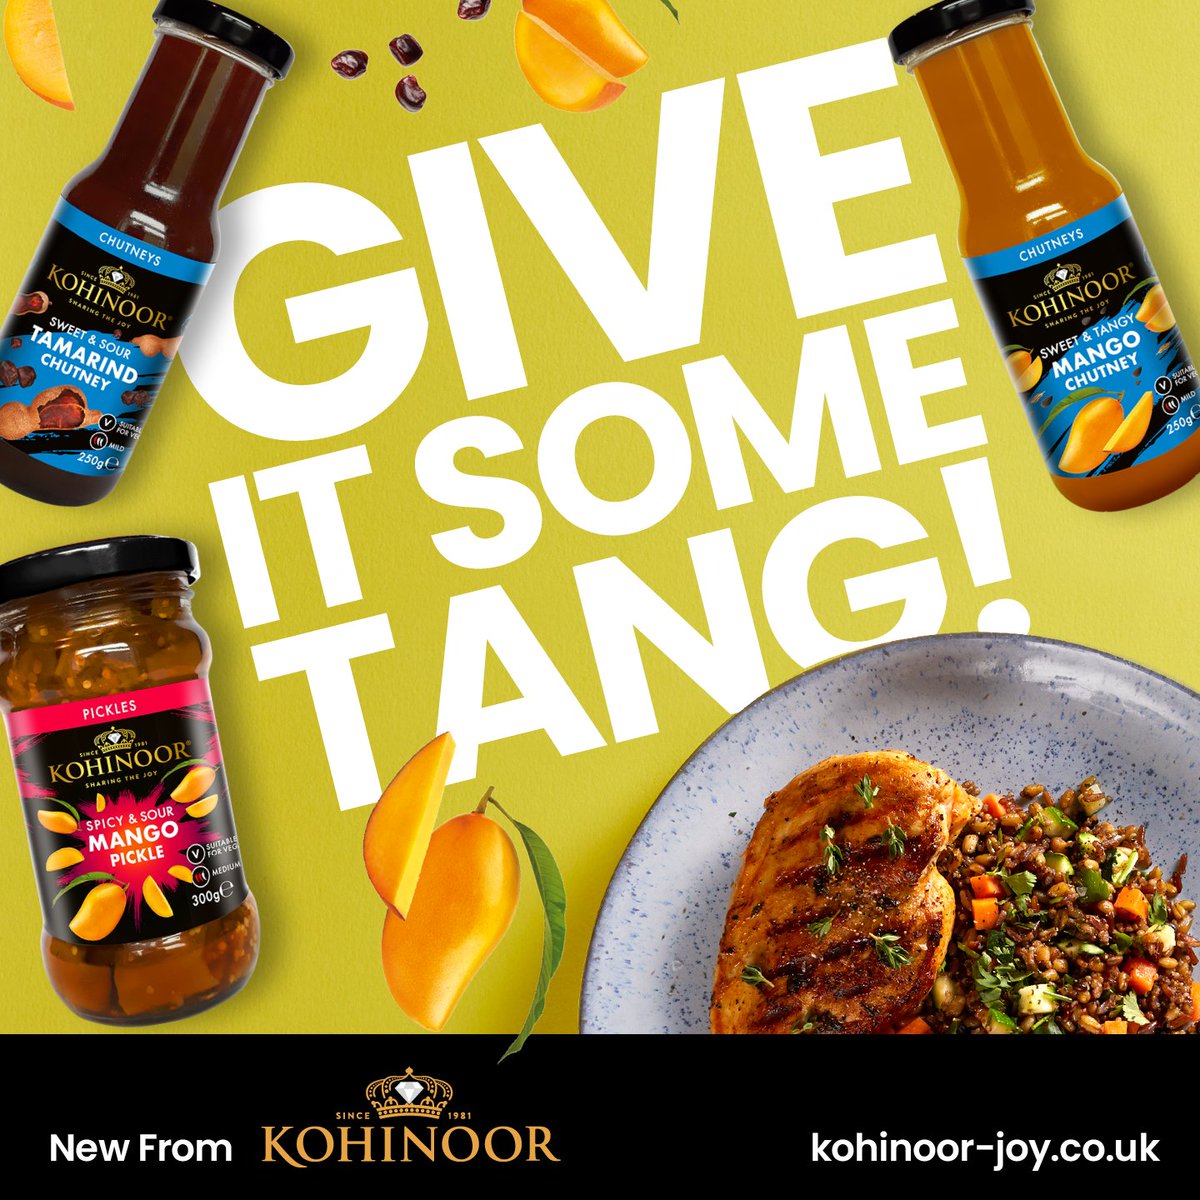 Our New Authentic Vegan Pickles & Chutneys are perfect for any occasion! Now available at Asda! See link for our 'Grilled Chicken Breast with Mango Chutney or Tamarind Chutney.' shorturl.at/hksRW